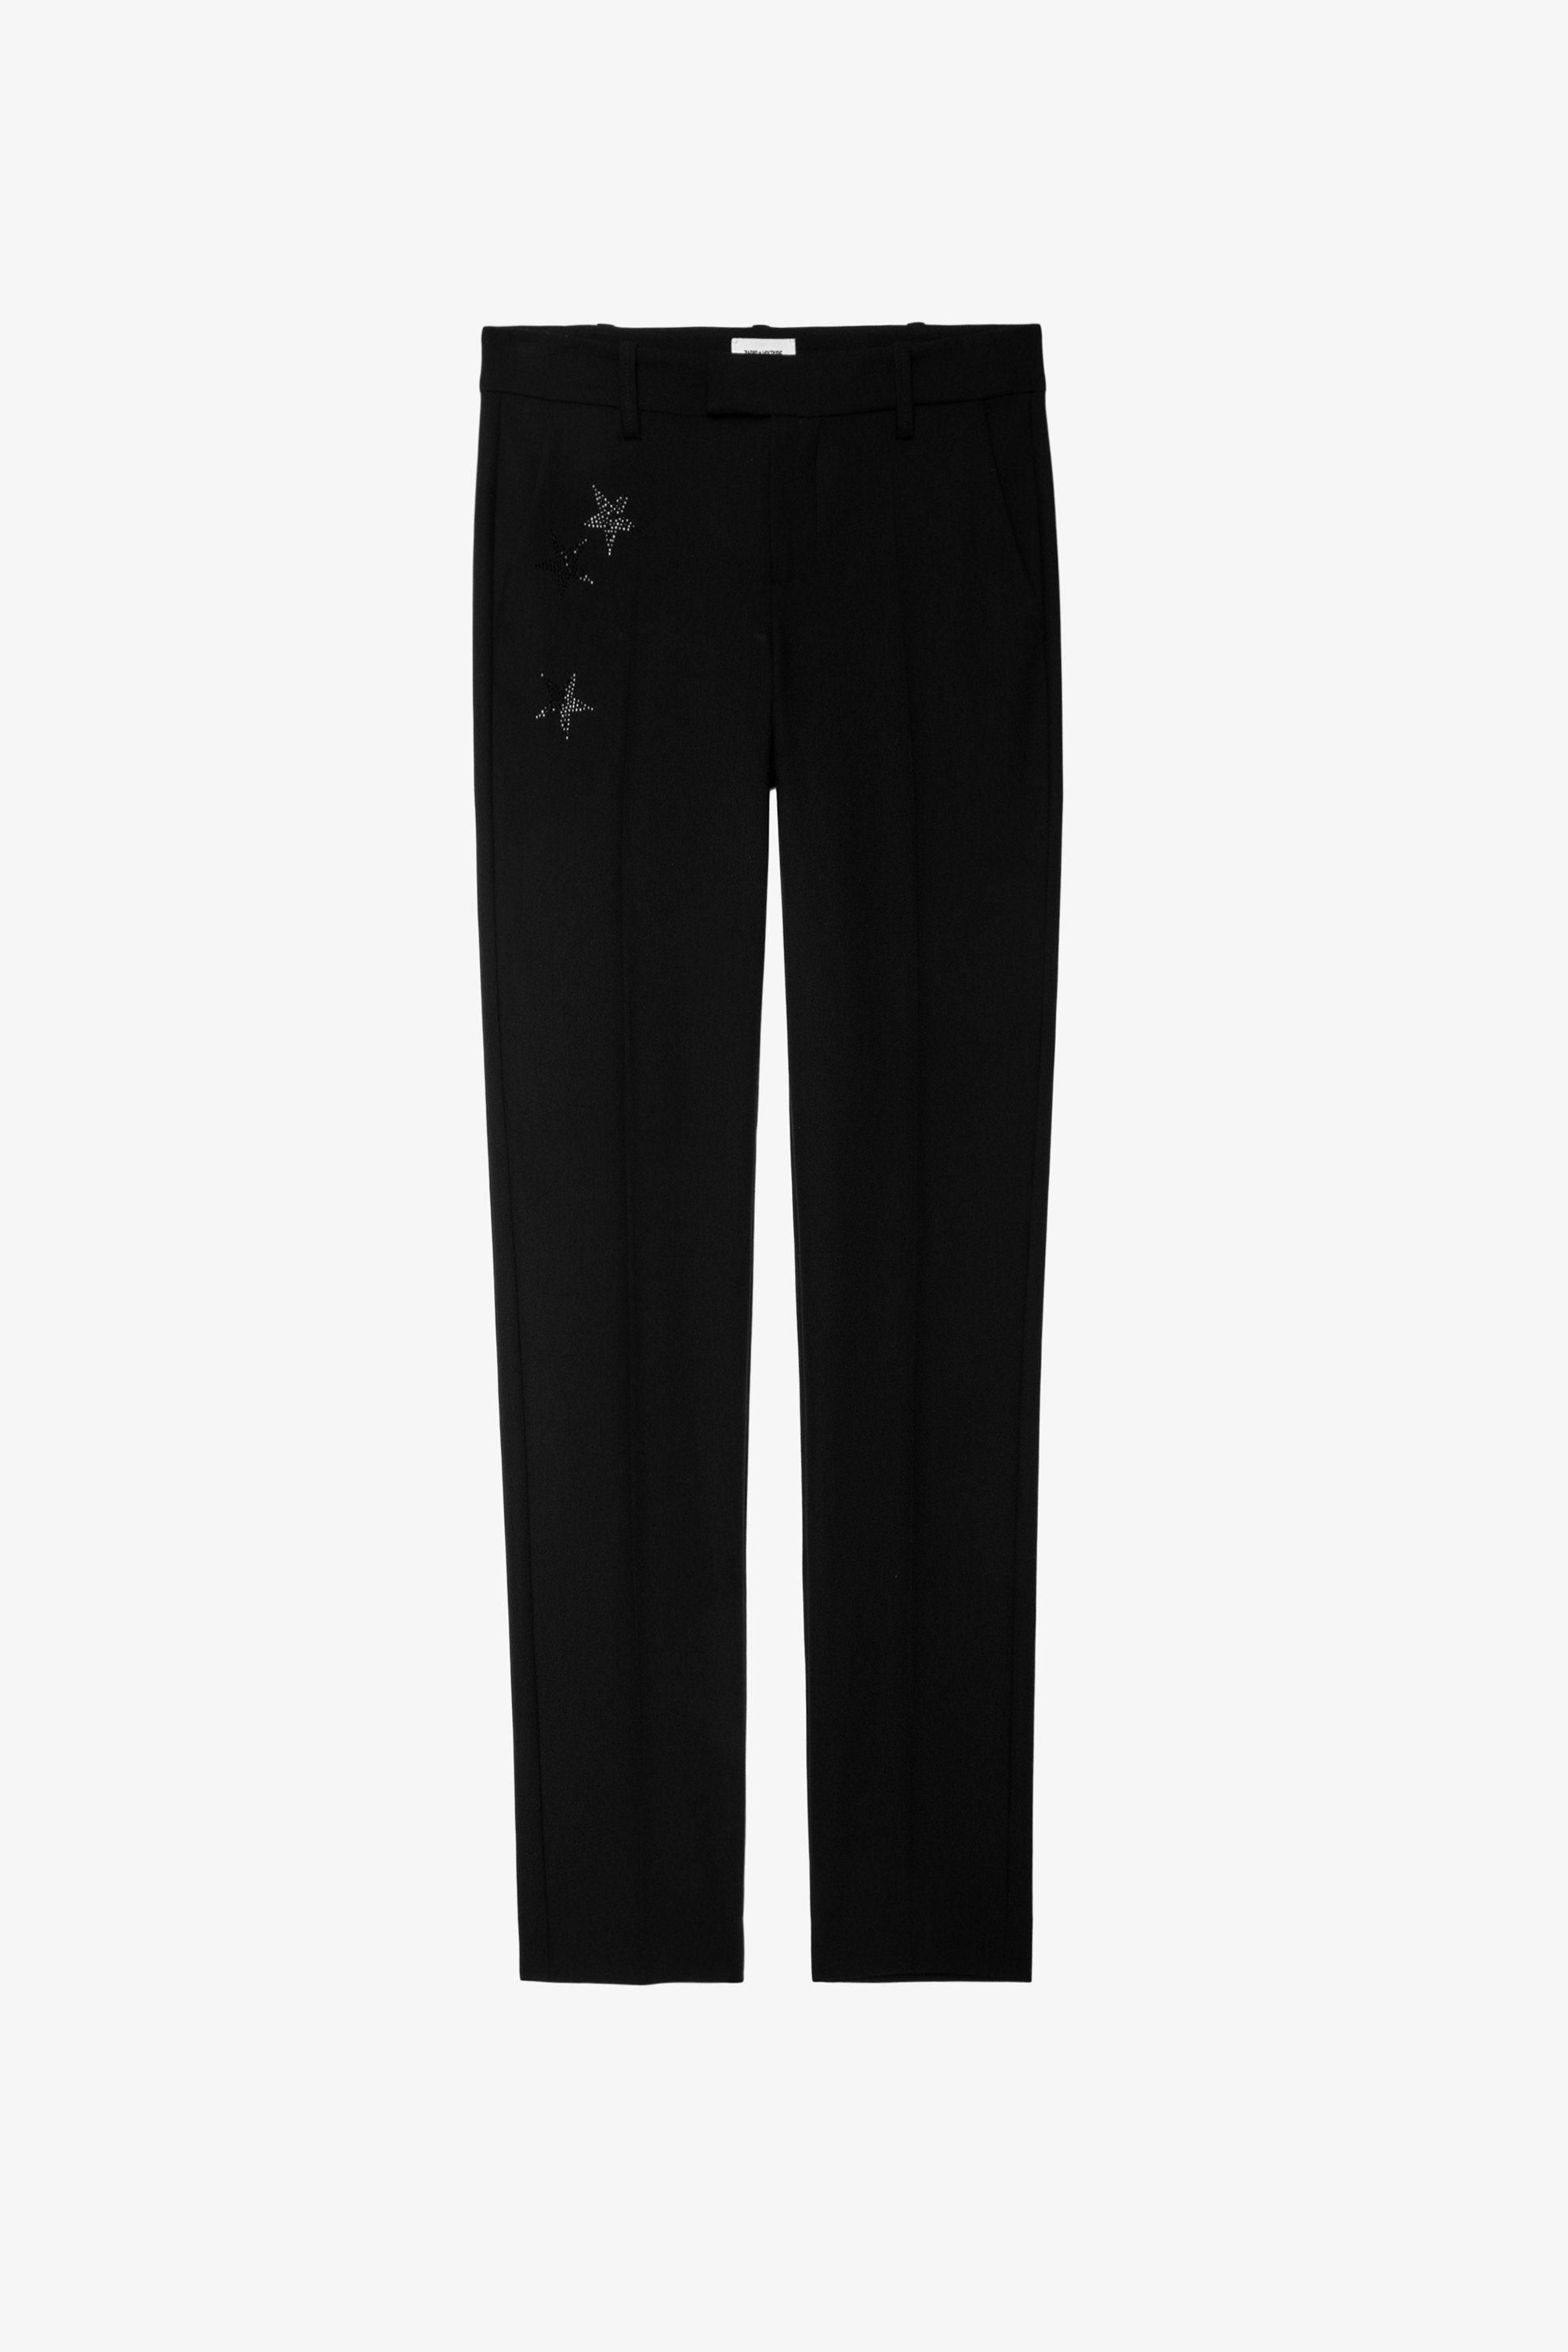 Prune Strass Star Trousers Woman’s Zadig&Voltaire black suit trousers with rhinestone stars on the pocket.